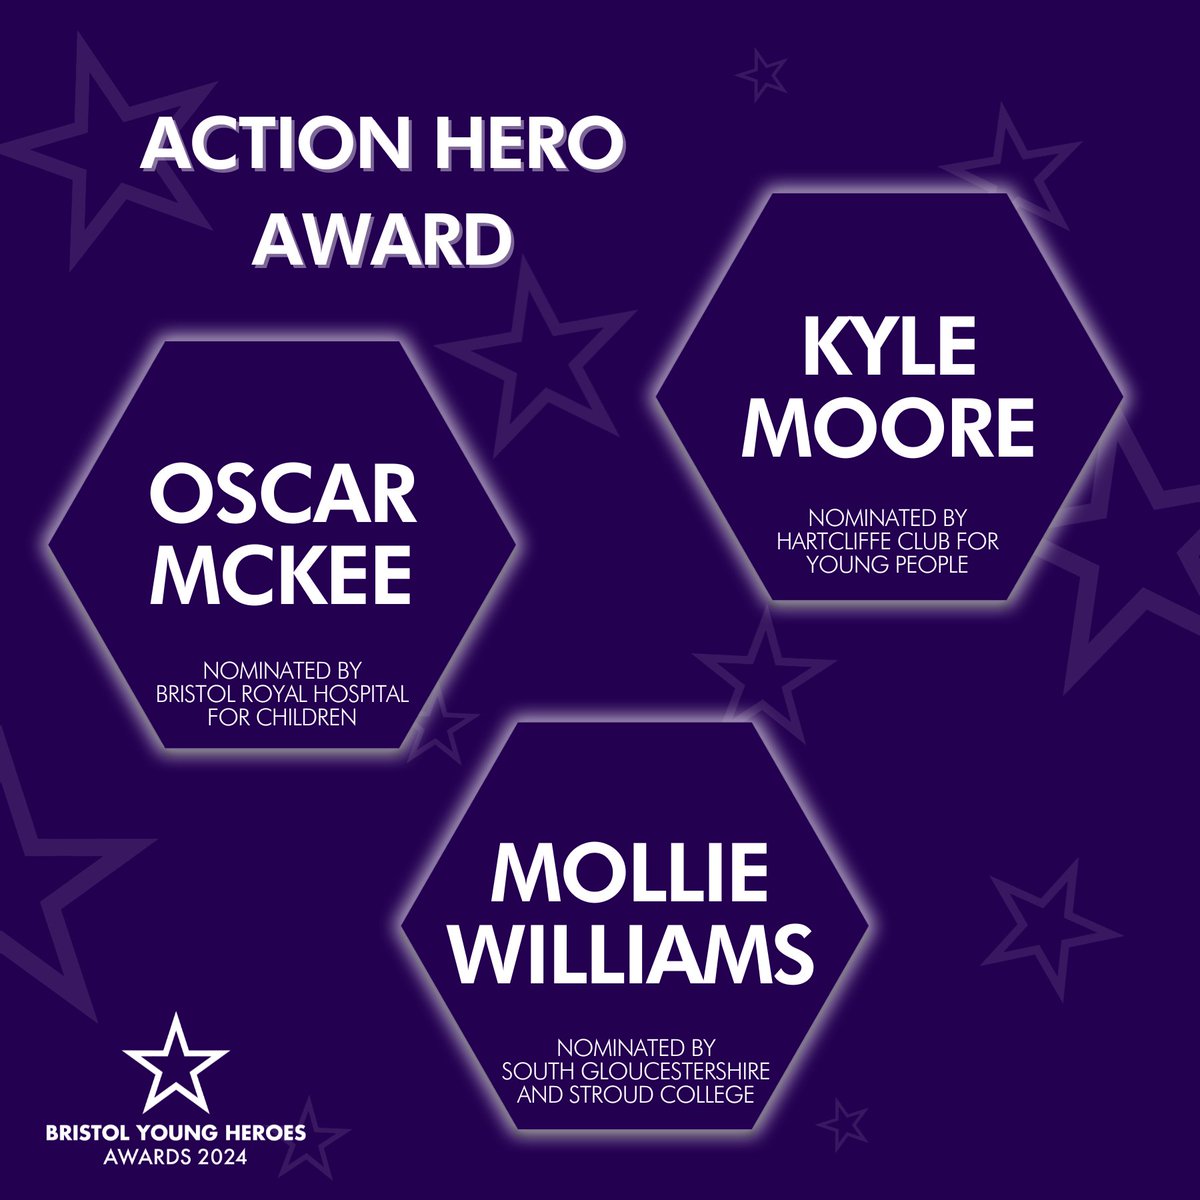 ✨Exciting News✨ Over the next few days we will be announcing the Bristol Young Heroes Awards 2024 Finalists! First, we have the Action Hero Award, congratulations to: 🌟 Oscar McKee 🌟 Kyle Moore 🌟 Mollie Williams Wishing you all the best of luck 🤞 #empoweringpeople #BYHA